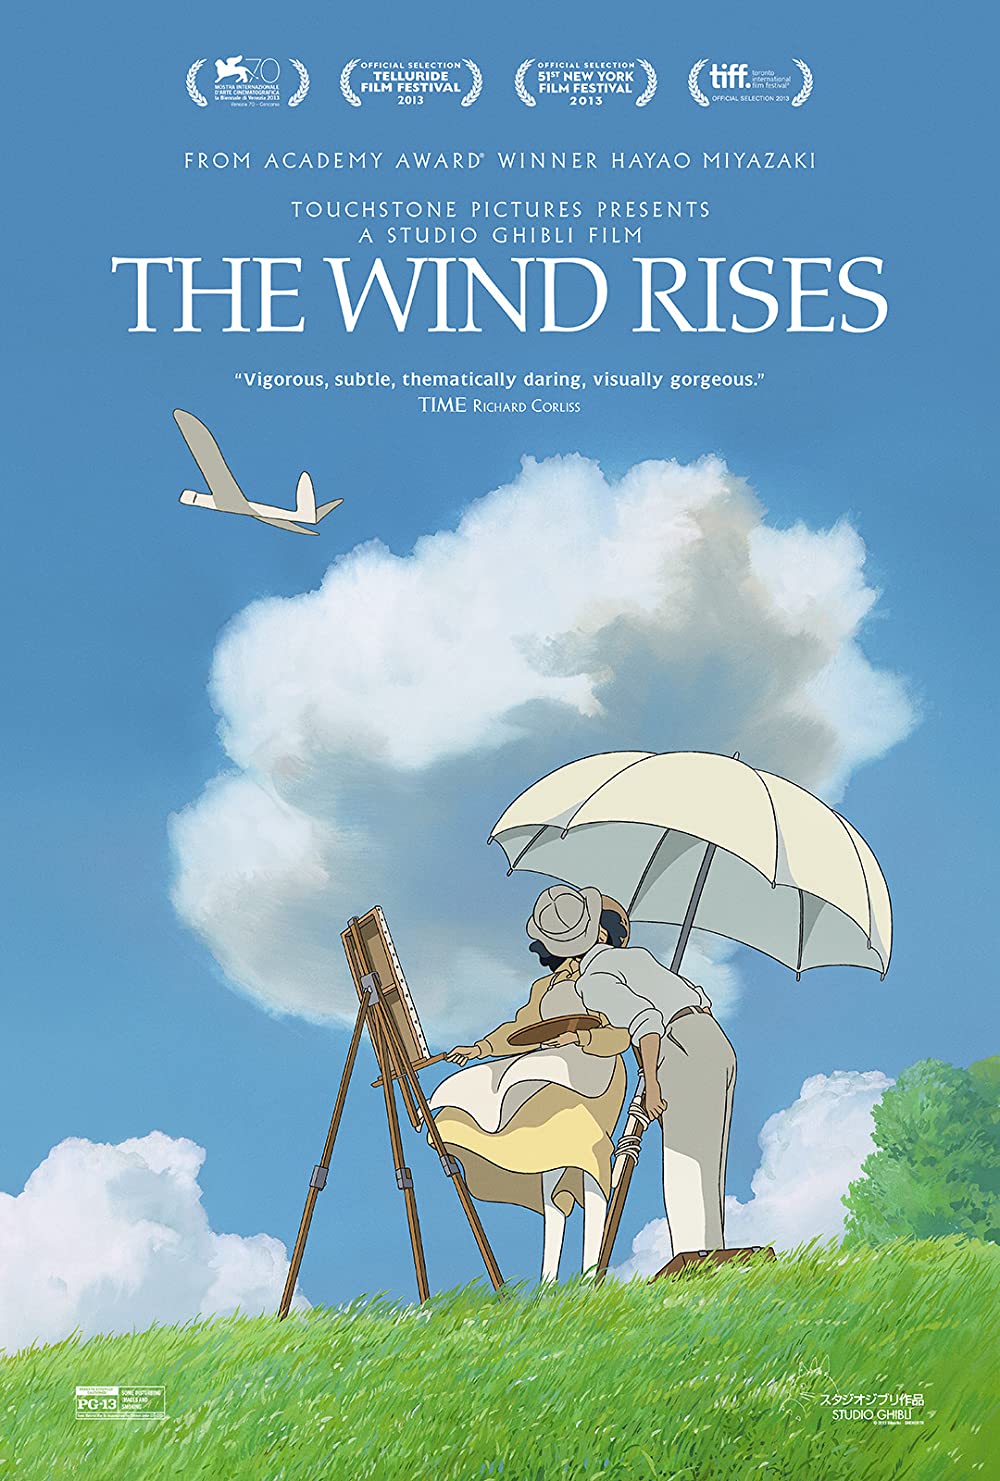 The Wind Rises (2013) is one of the best anime movies with romance